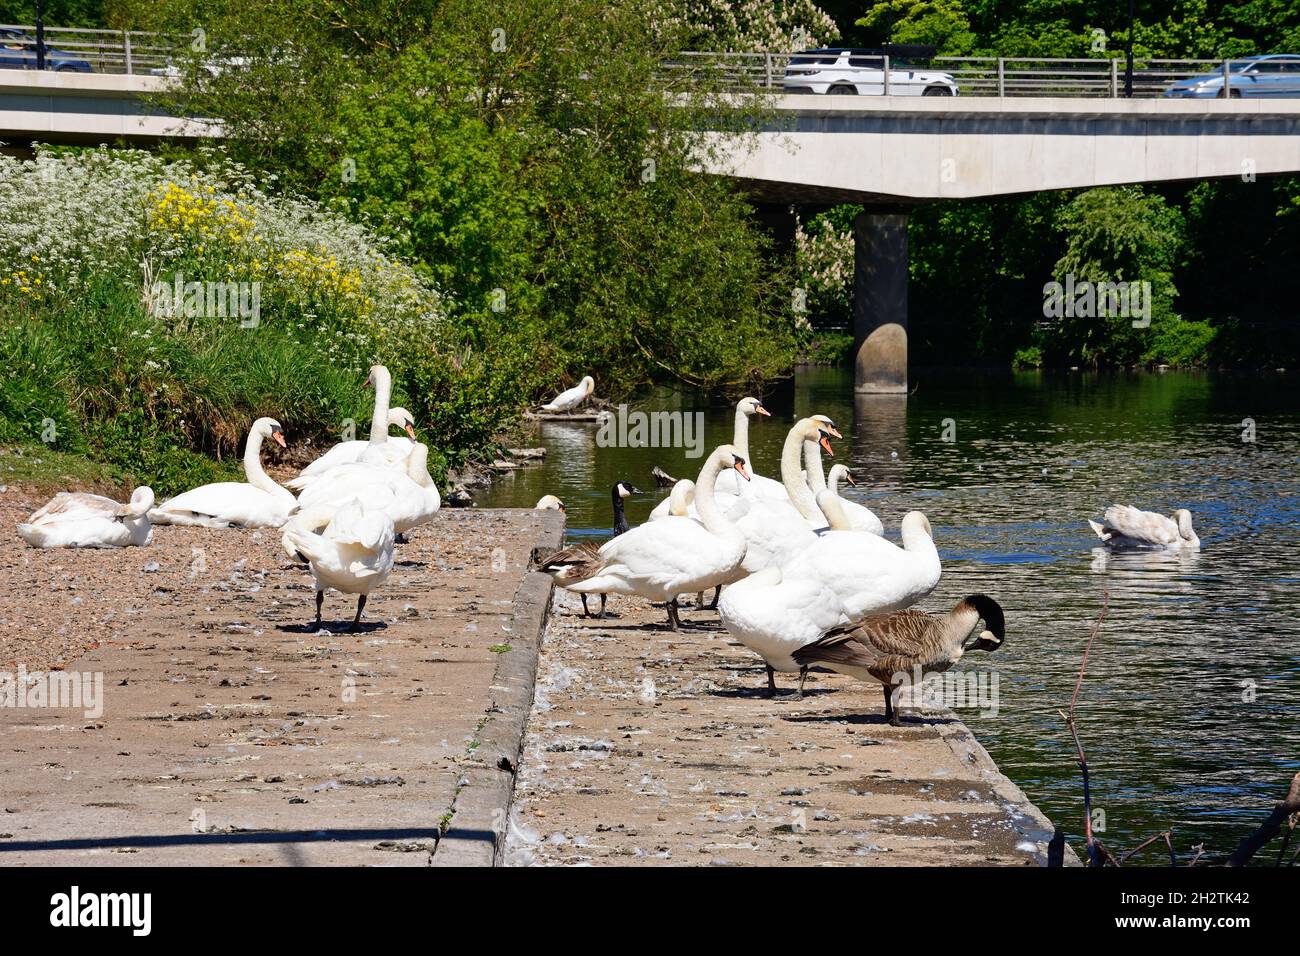 Swans on the River Trent with the A5189 road bridge to the rear, Burton upon Trent, Staffordshire, England, UK, Western Europe. Stock Photo